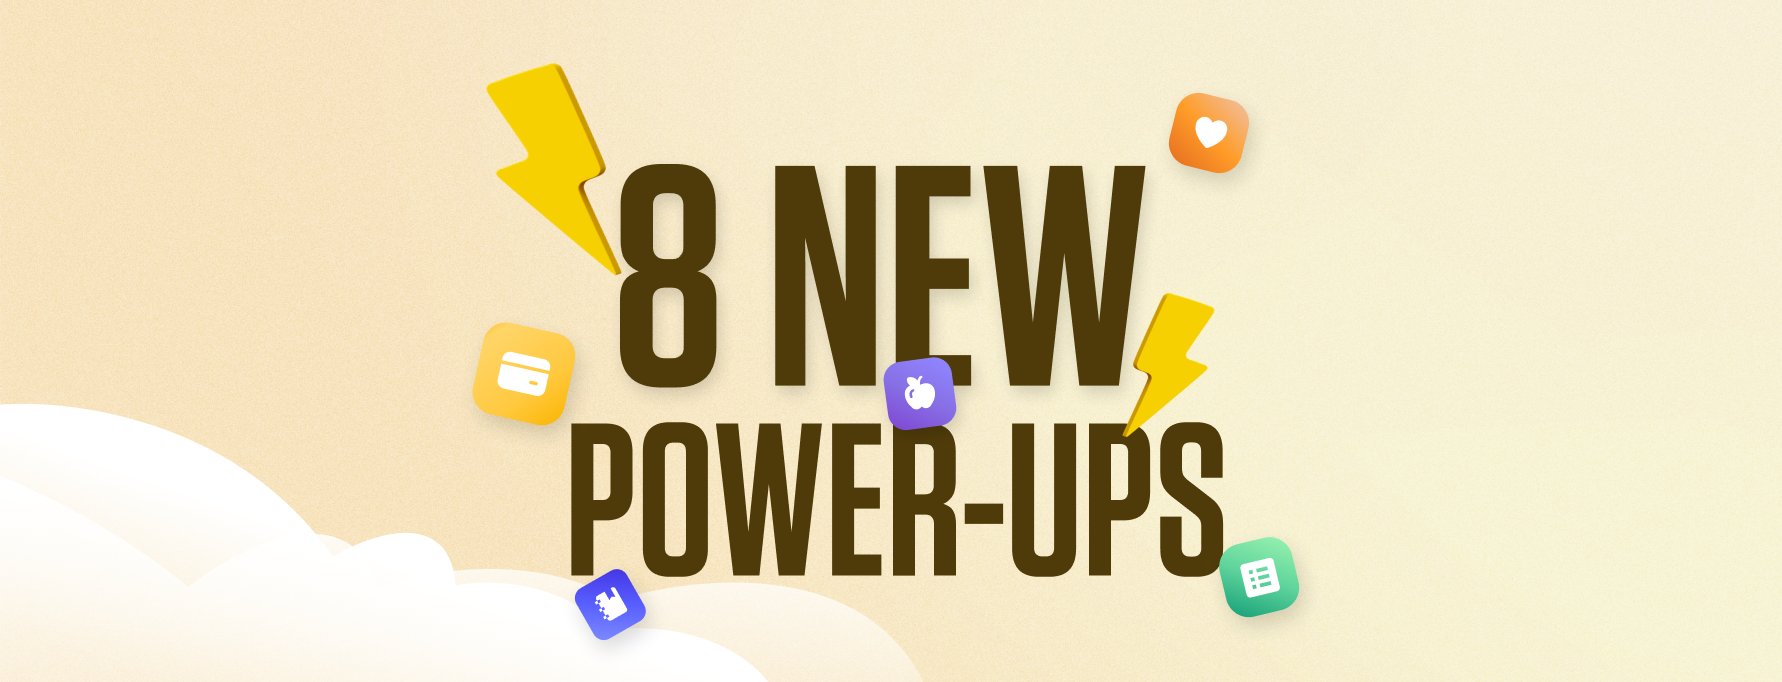 8 New Power-Ups for October: Payments & Packages, Forms, Photo Progress, and more! 🚀